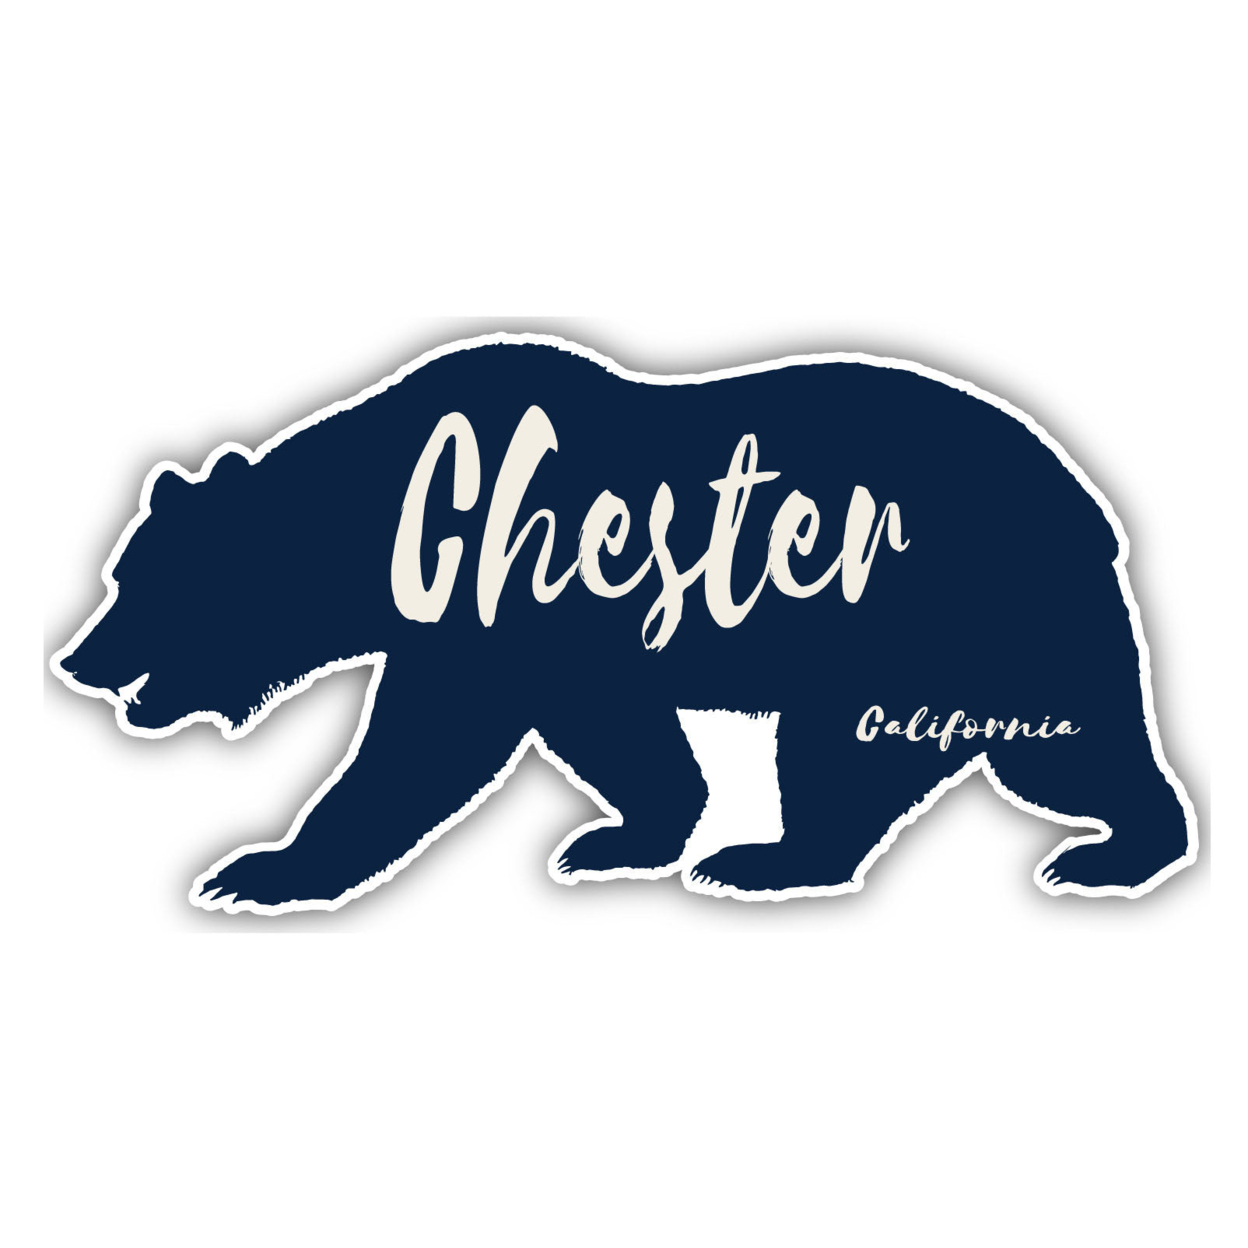 Chester California Souvenir Decorative Stickers (Choose Theme And Size) - 4-Pack, 2-Inch, Bear